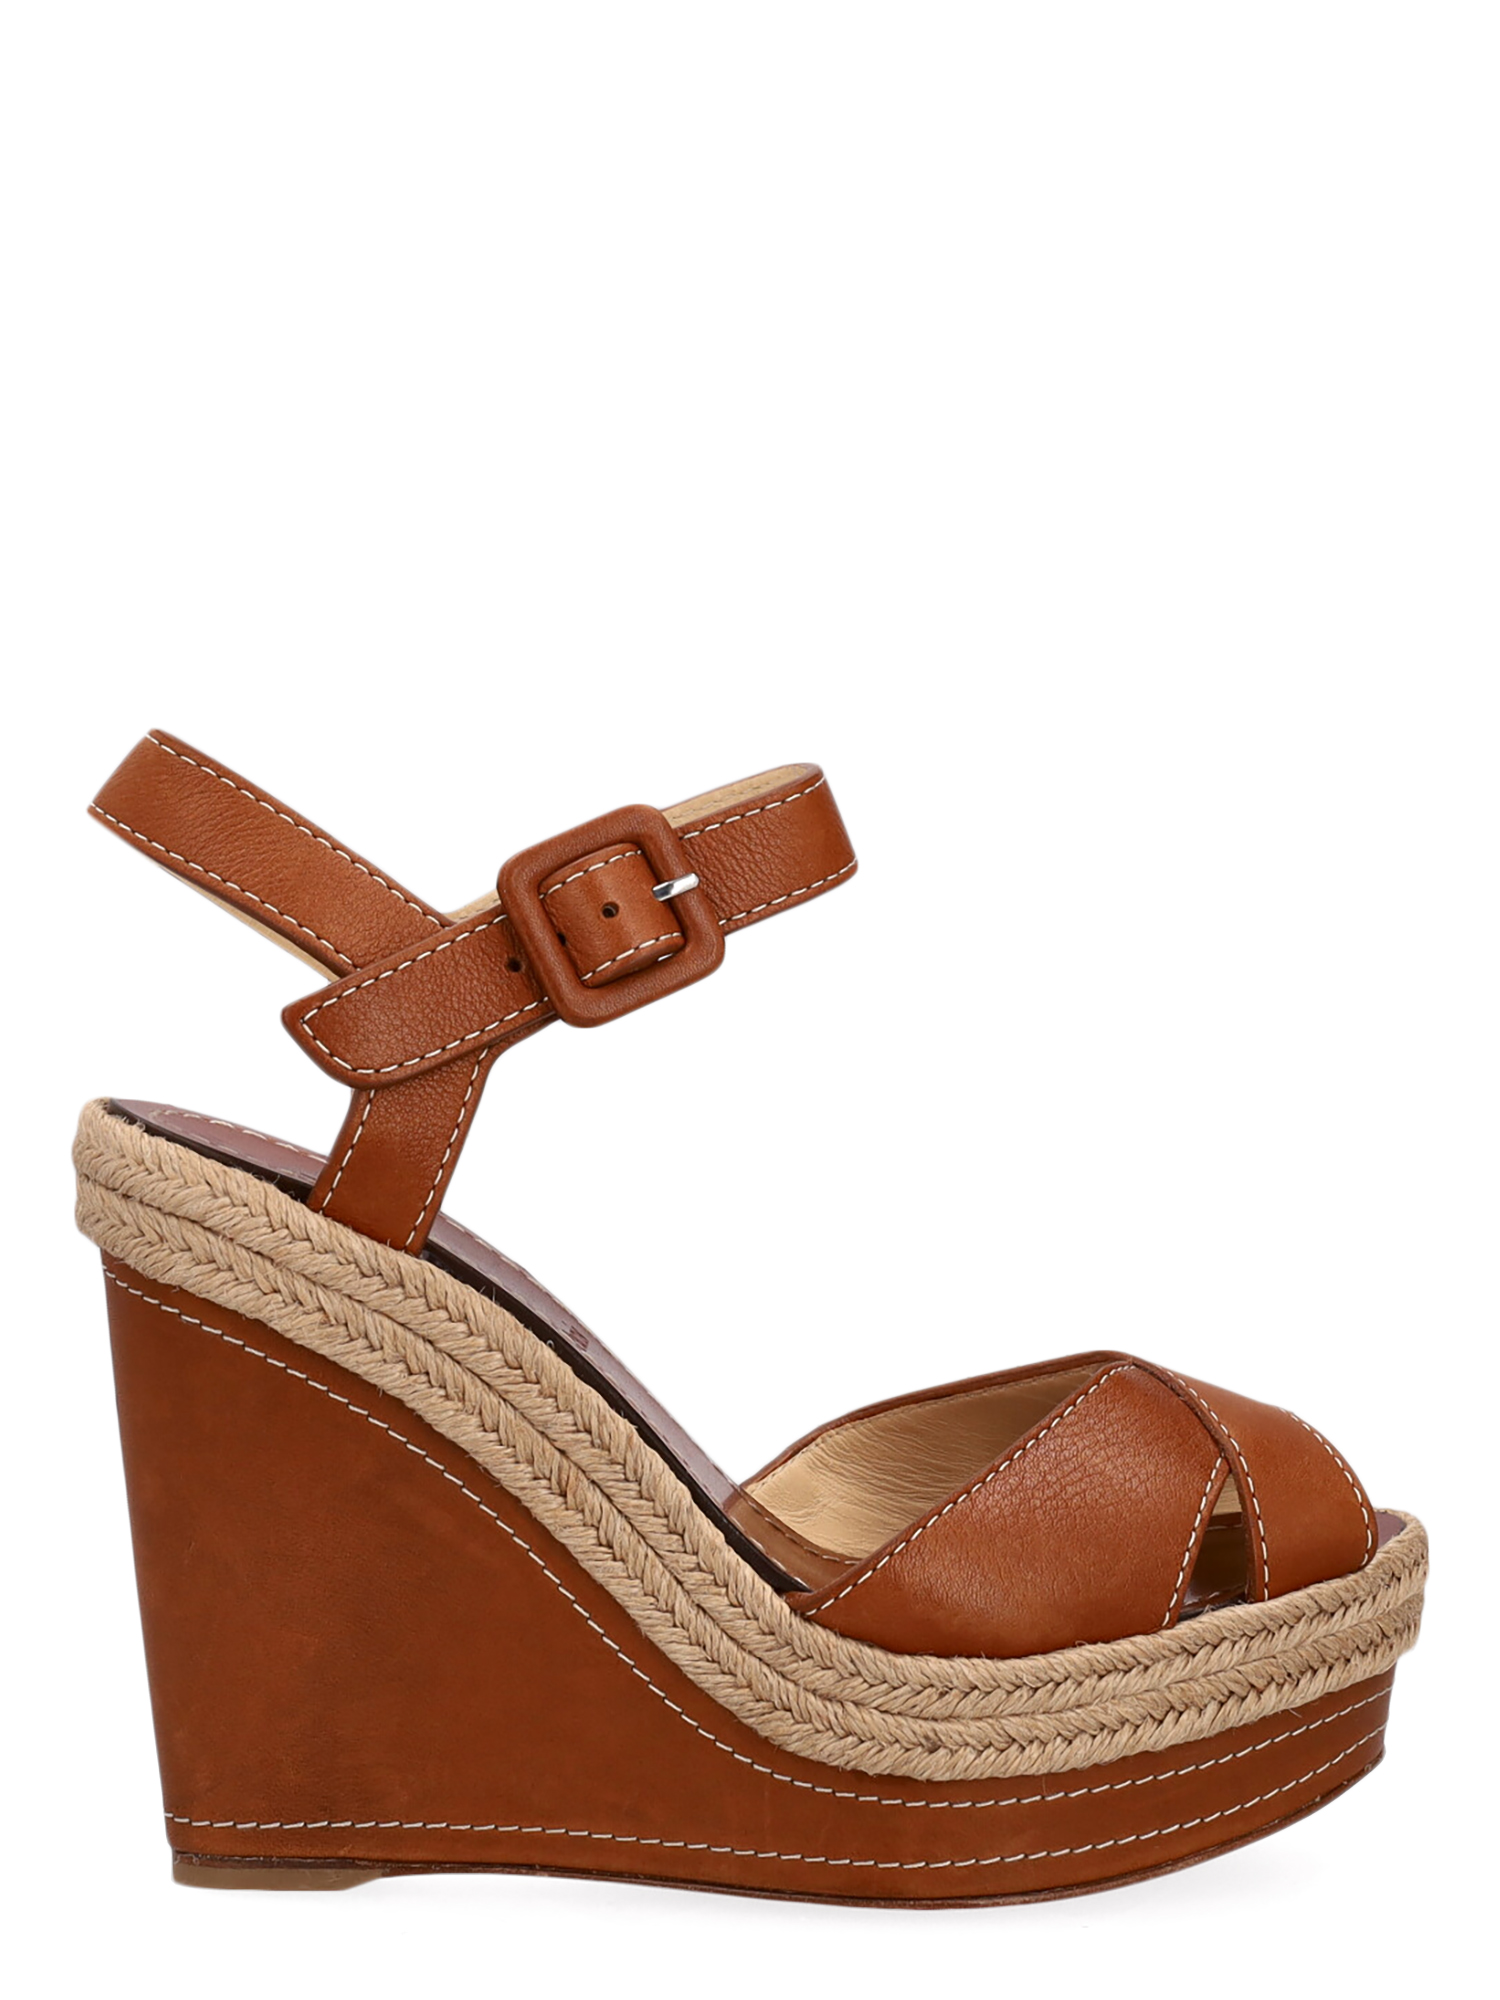 Pre-owned Christian Louboutin Women's Wedges -  - In Brown Leather